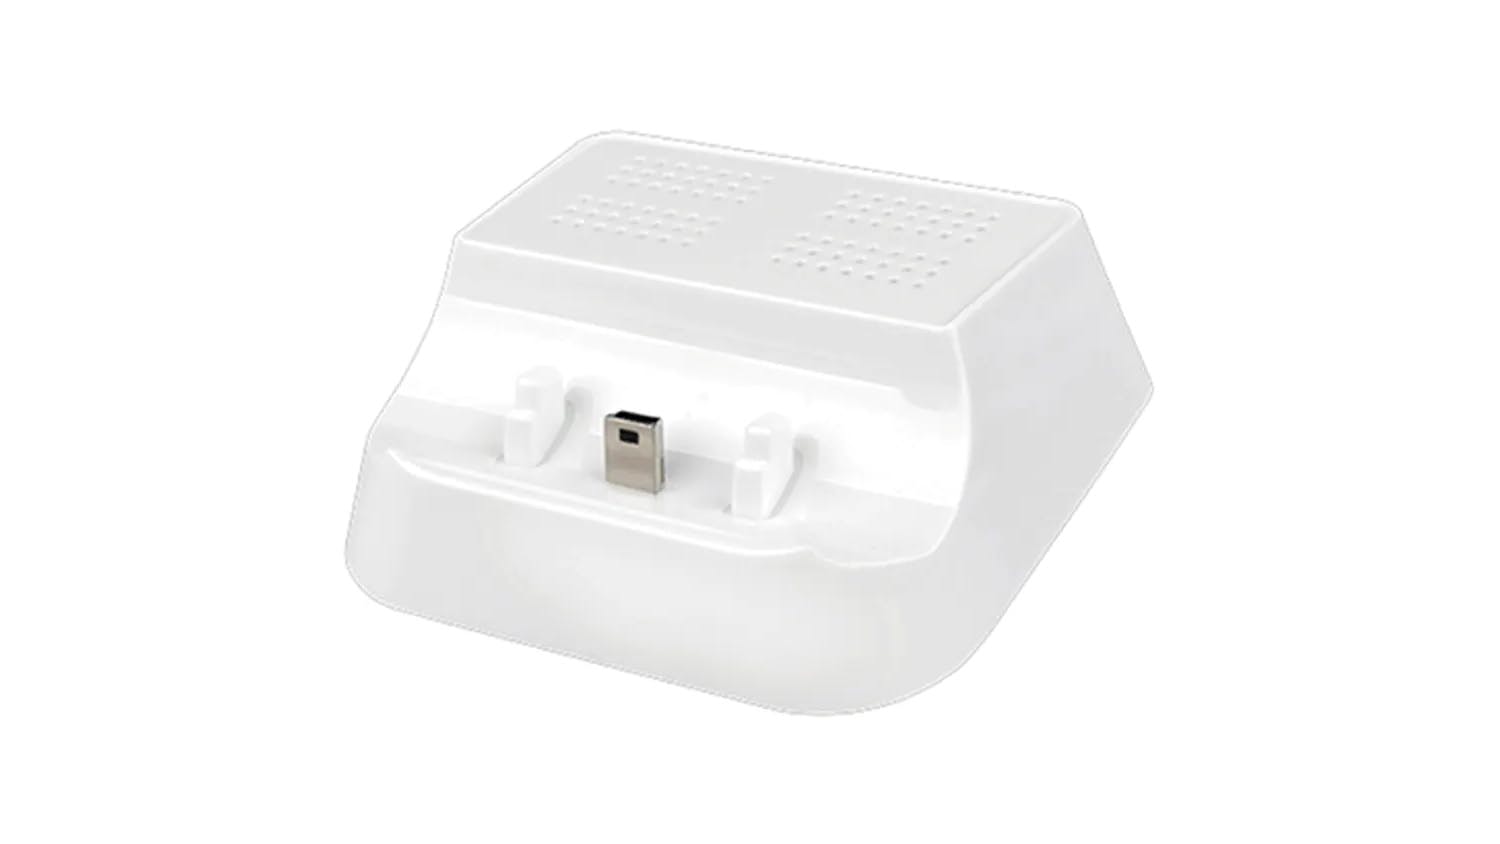 Uniden App Dock for the BW 31xx Series of Uniden Baby Monitors